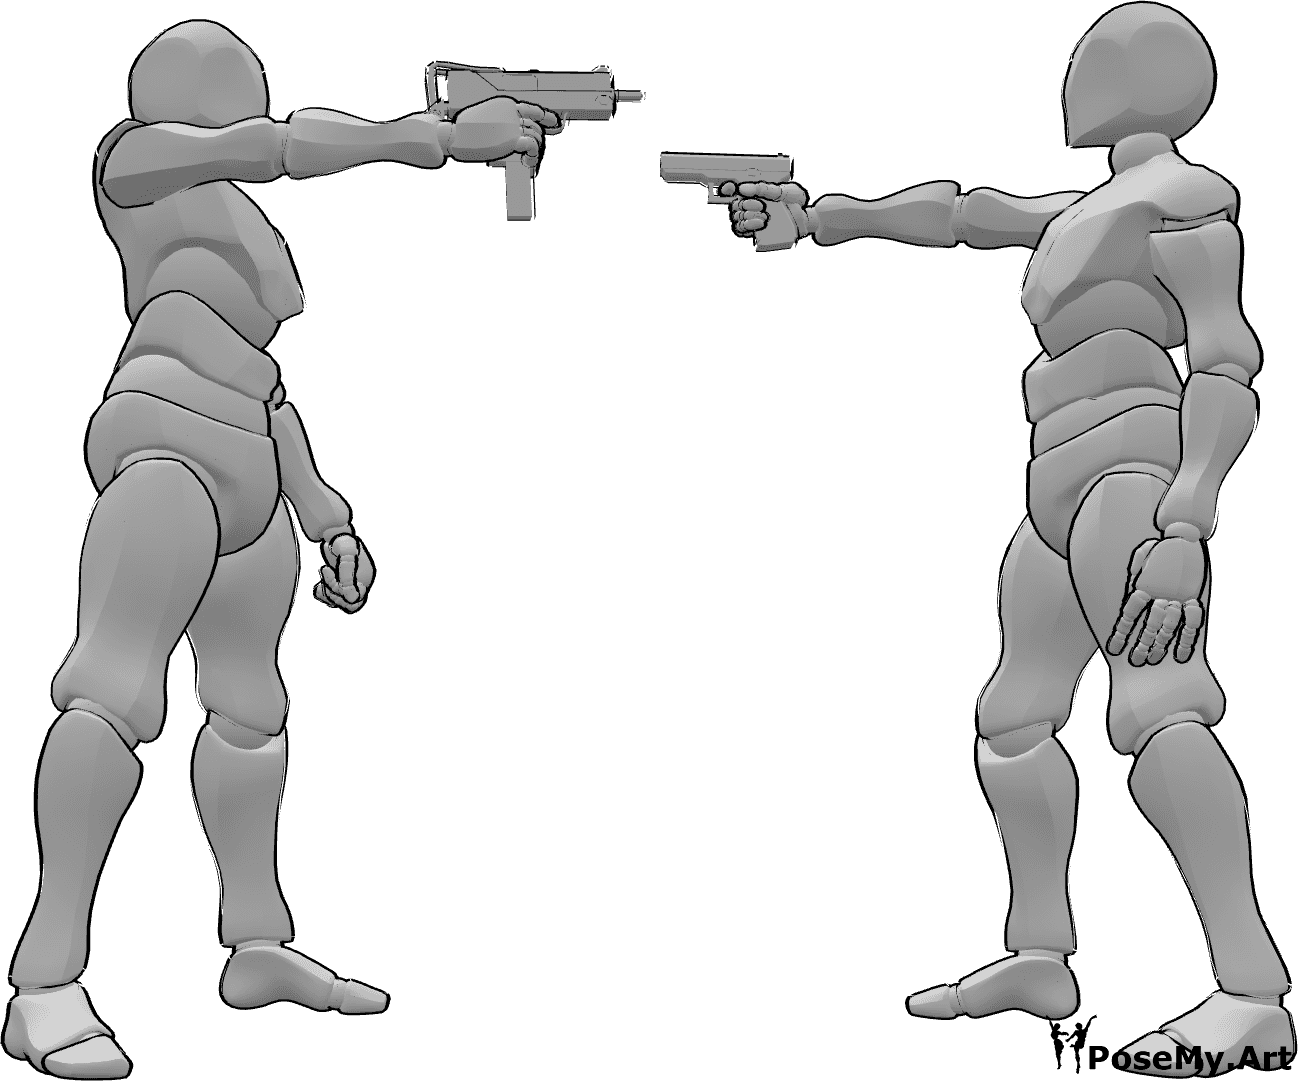 Man Shooting Gun Pose Illustration with Silhouette Style Stock Vector |  Adobe Stock